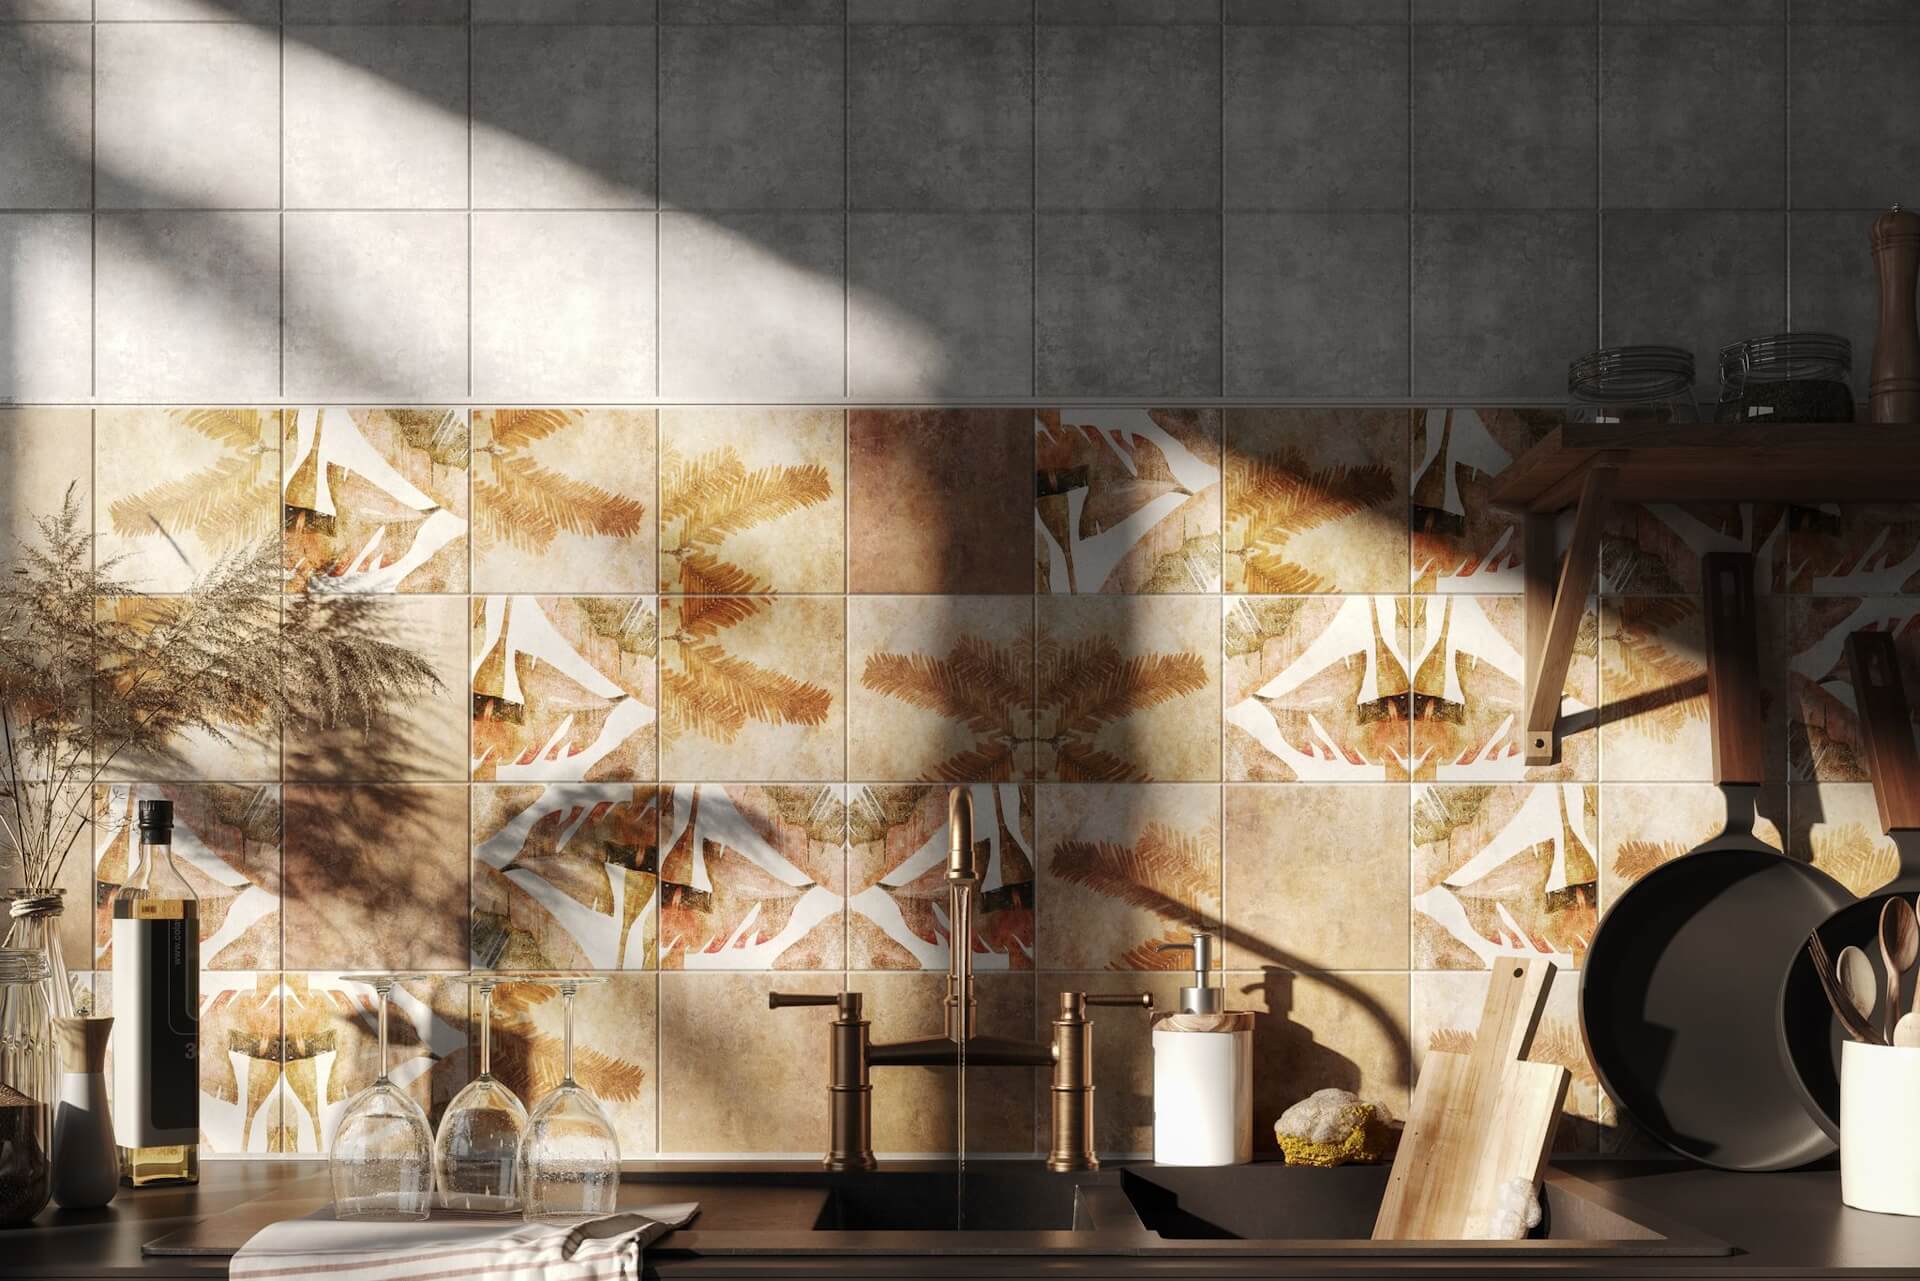 Photorealistic 3D Visualization for Tile Advertising